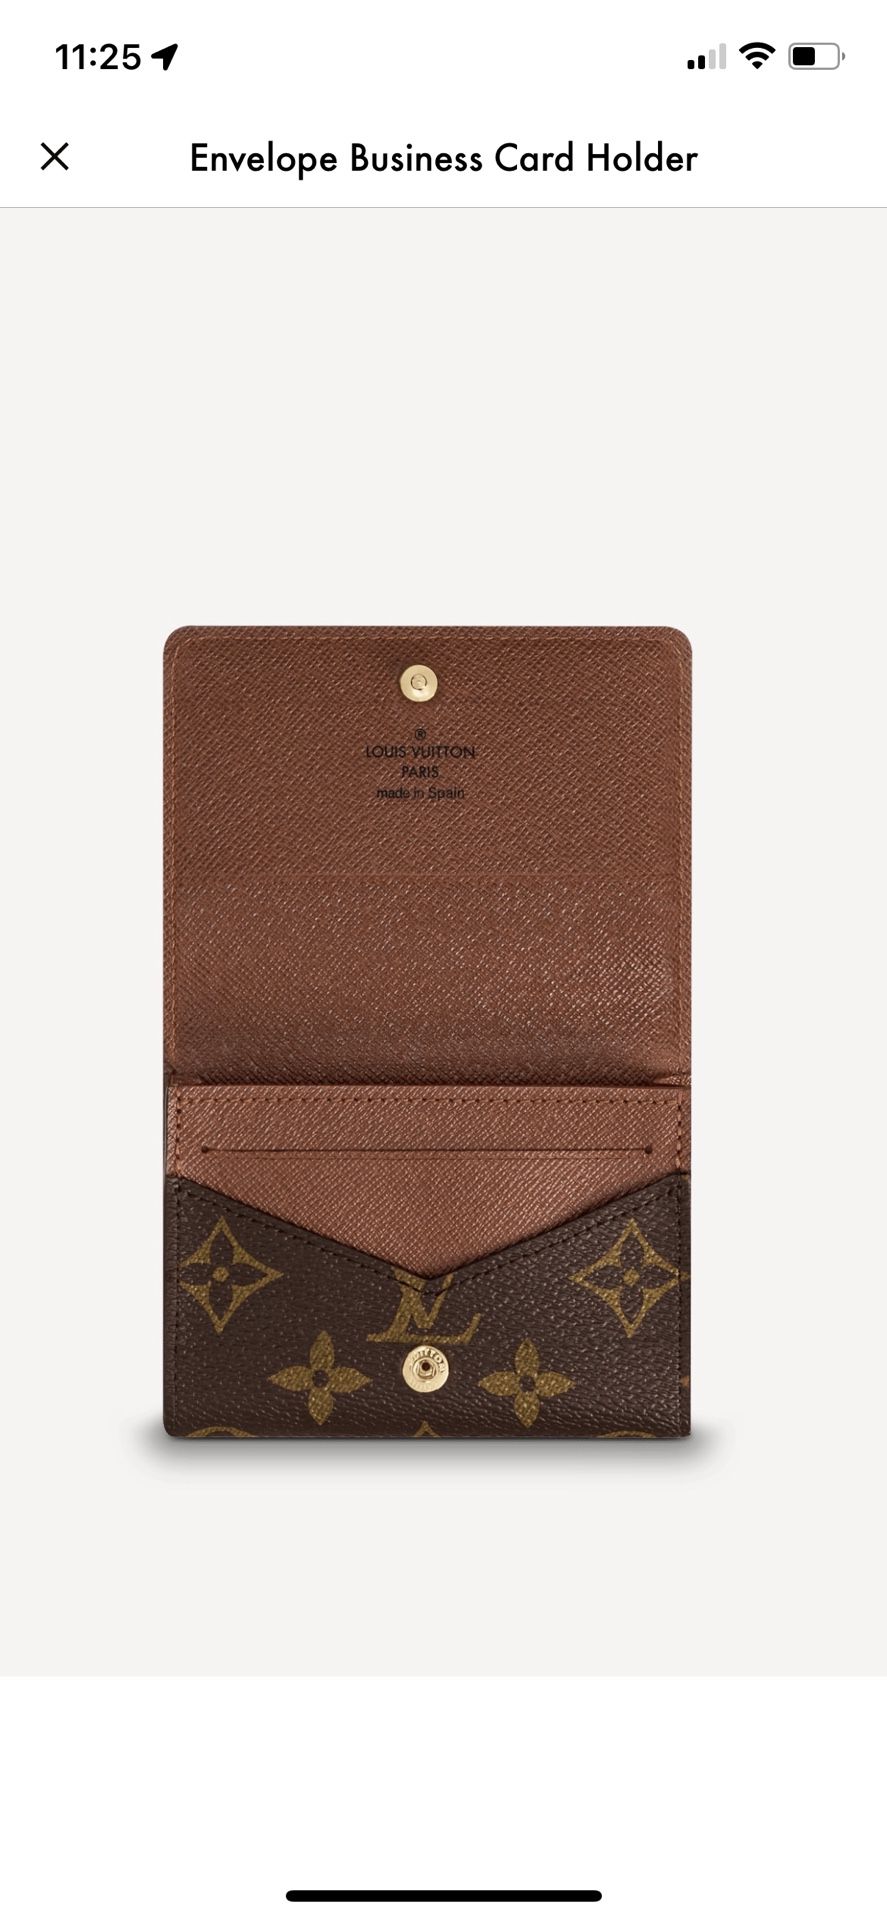 Identify fake louis vuitton using authenticity card and envelope